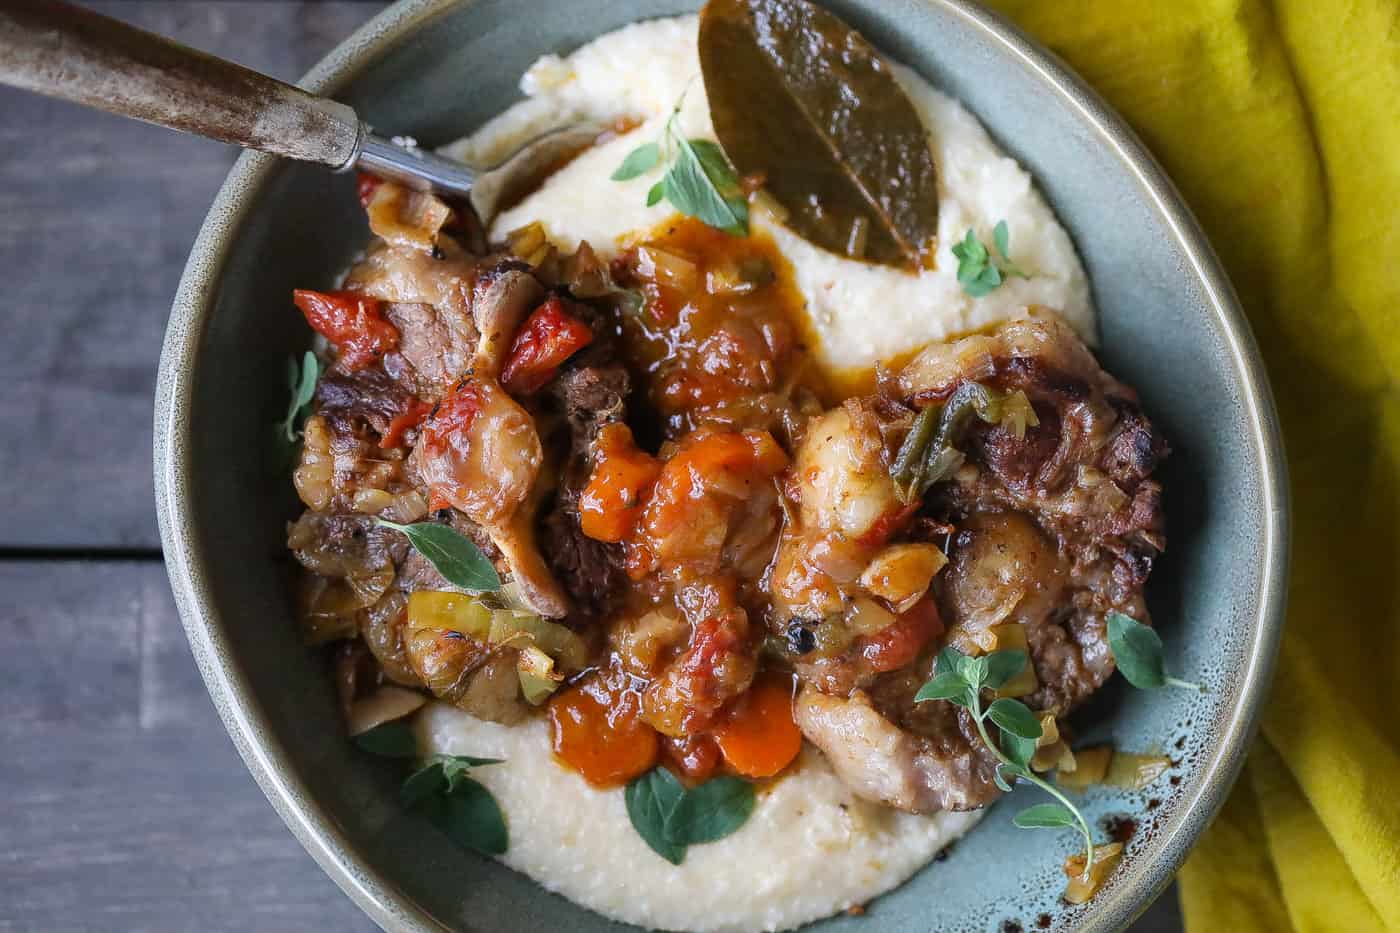 oxtails with grits in a bowl